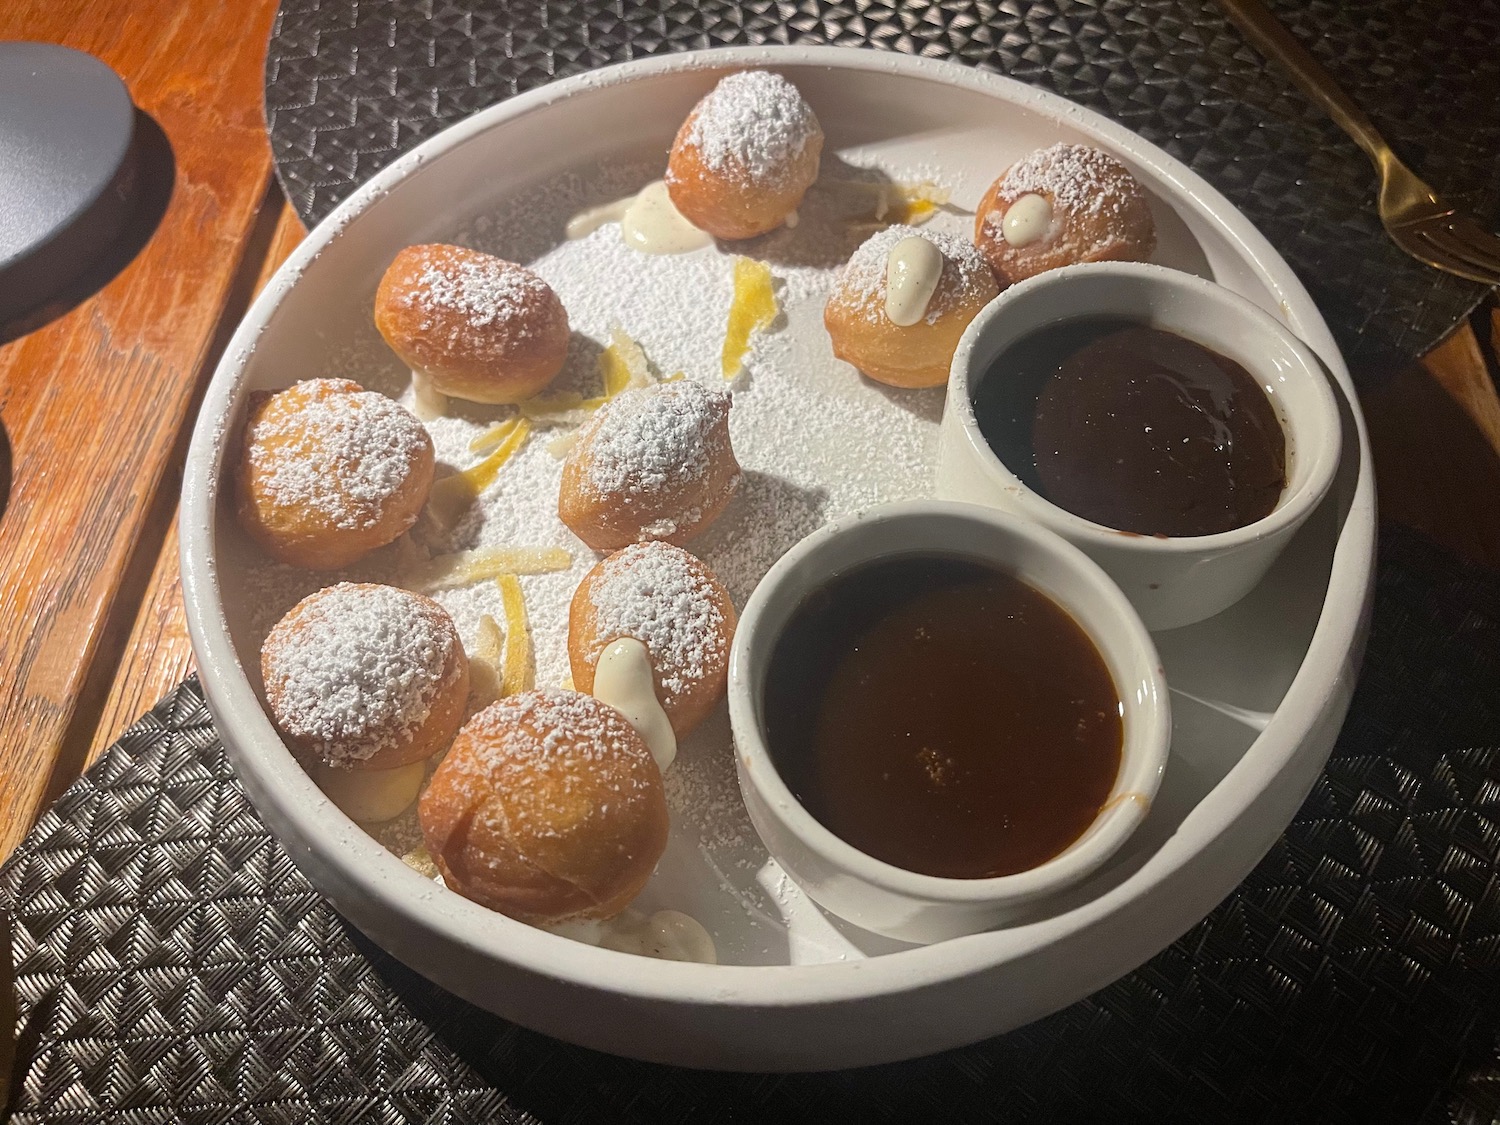 a plate of food with sauces and powdered sugar